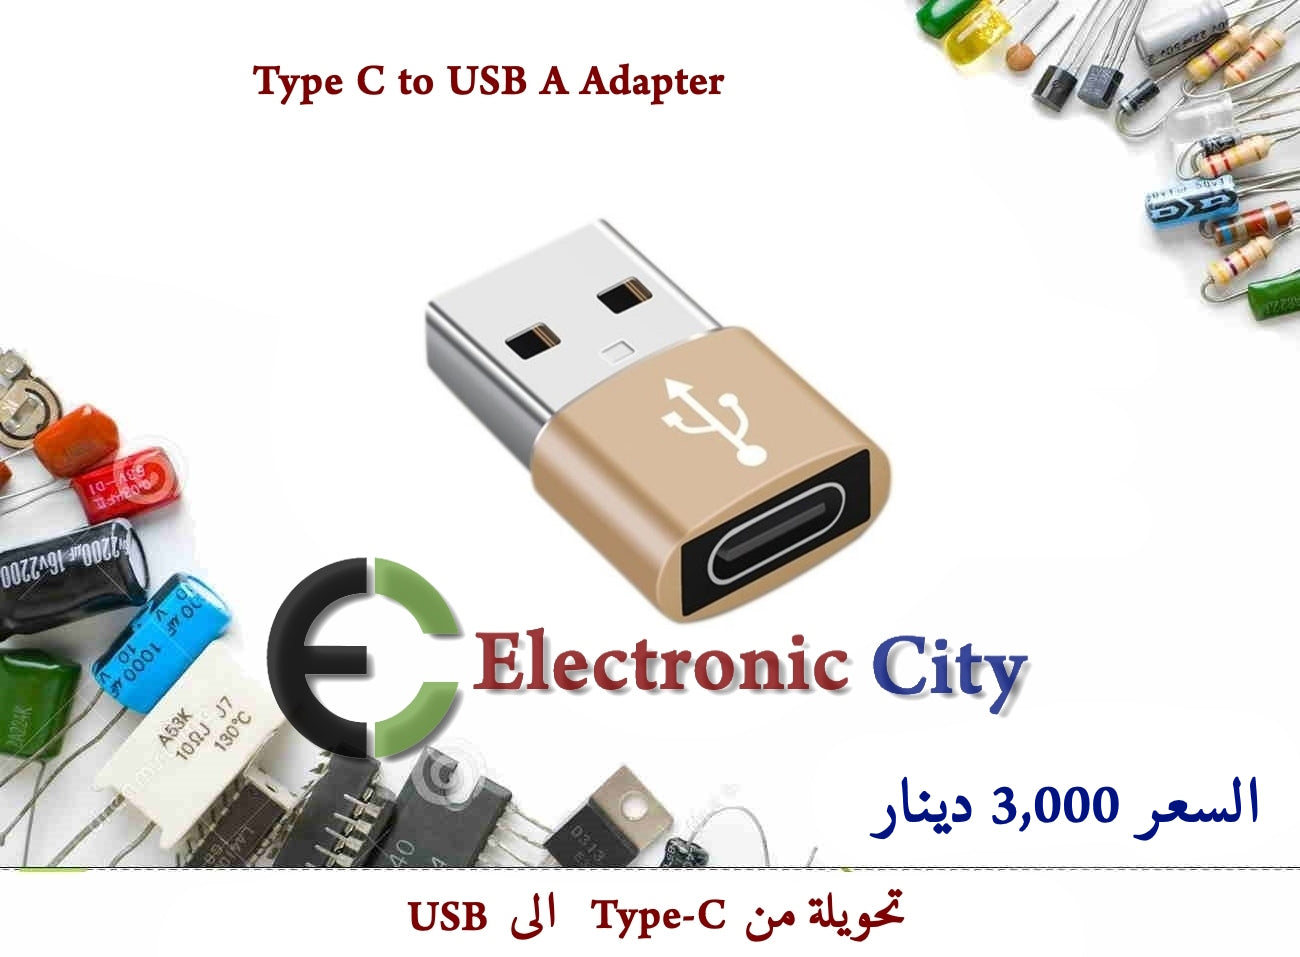 Type C to USB A Adapter